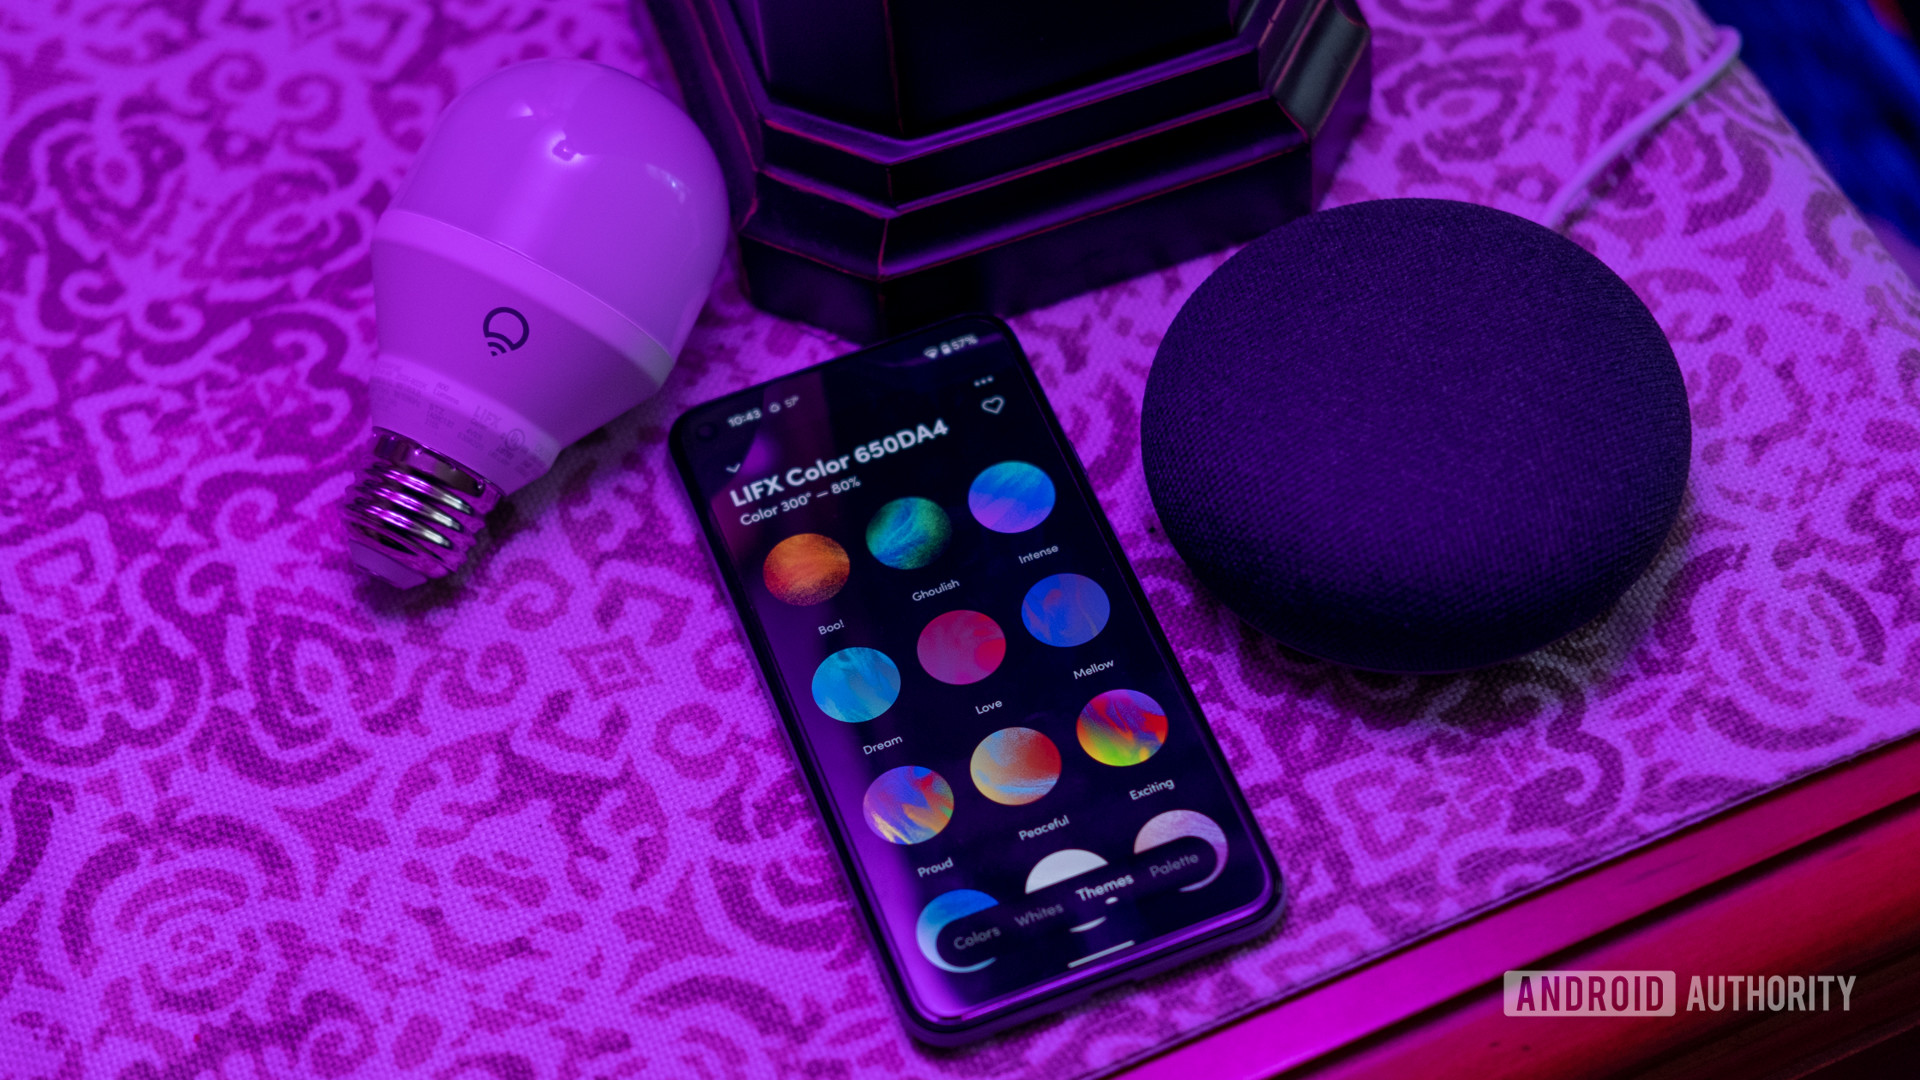 An image of the LIFX Color with the app and Google Home Mini